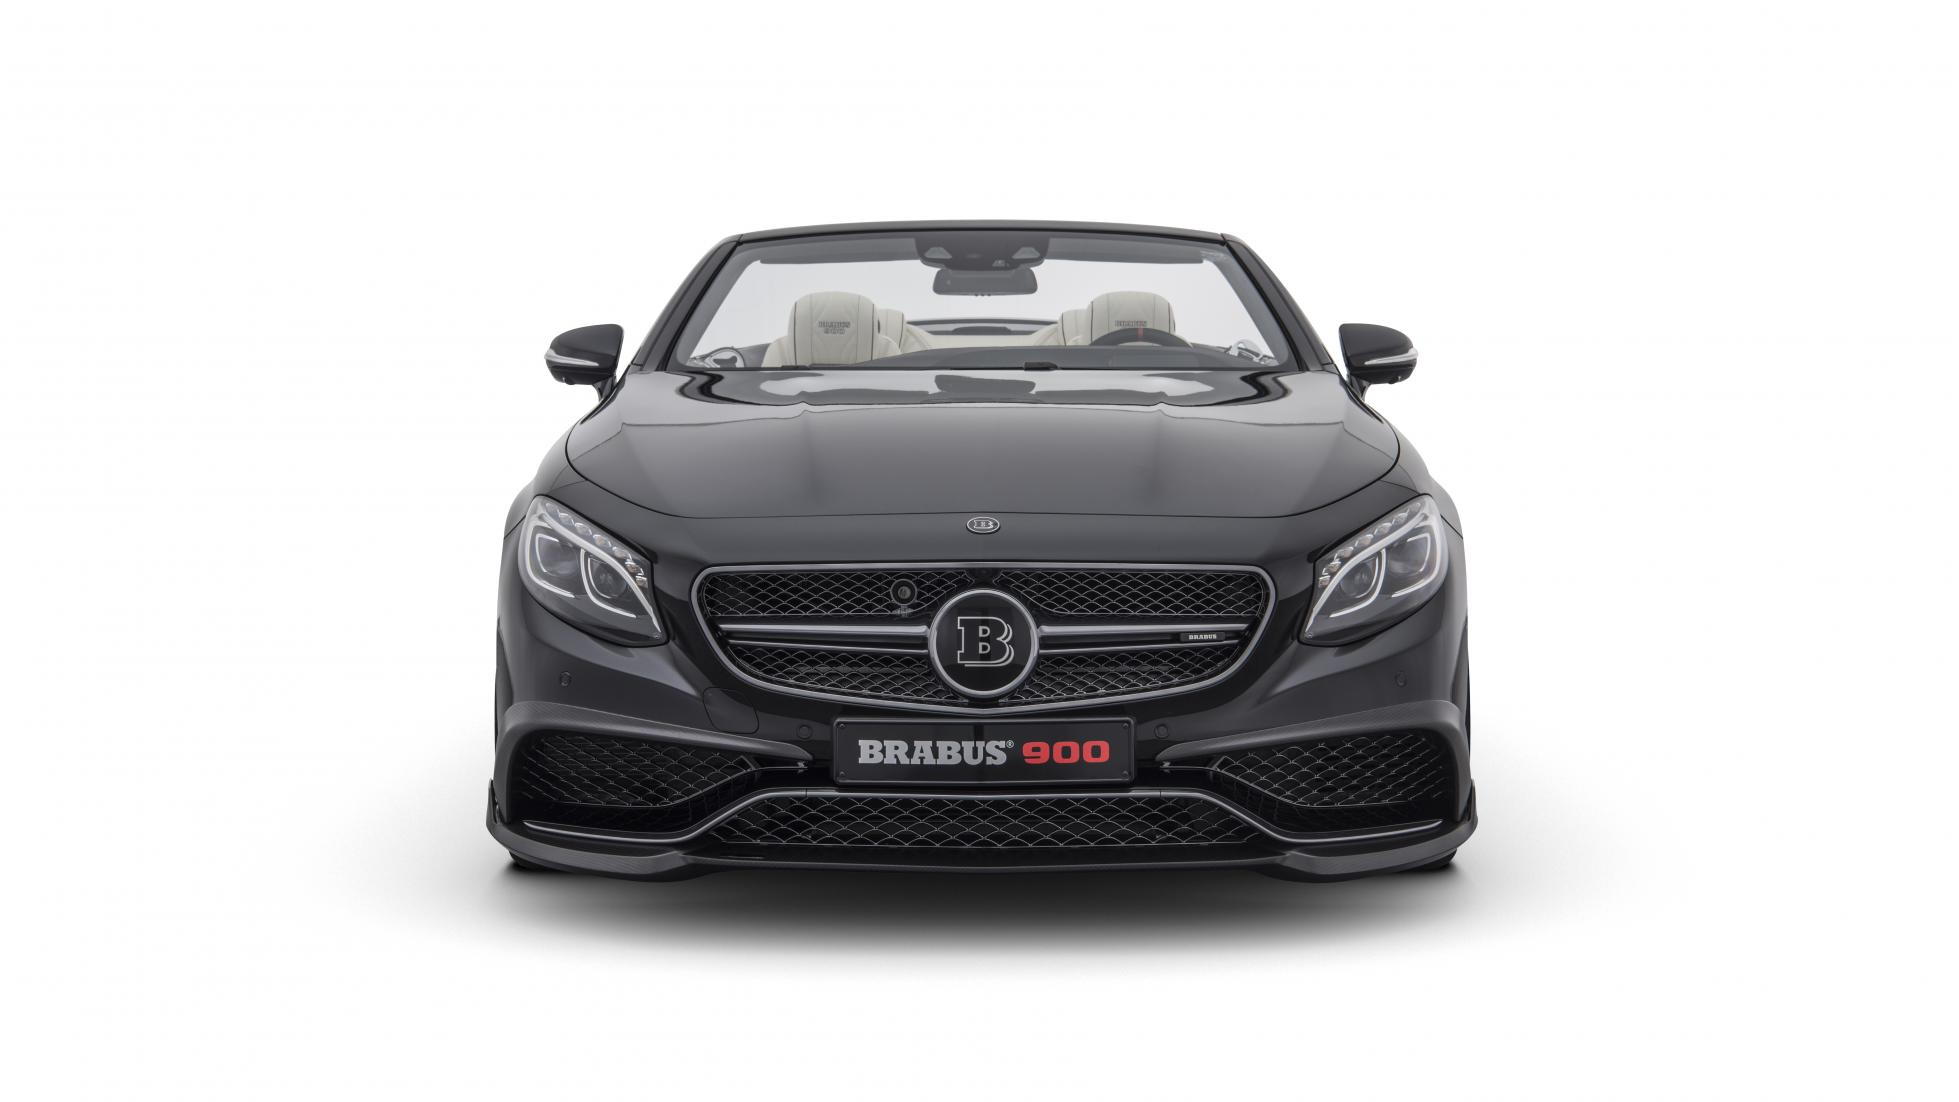 Brabus 900 Rocket based on the Mercedes-AMG S65 Cabrio